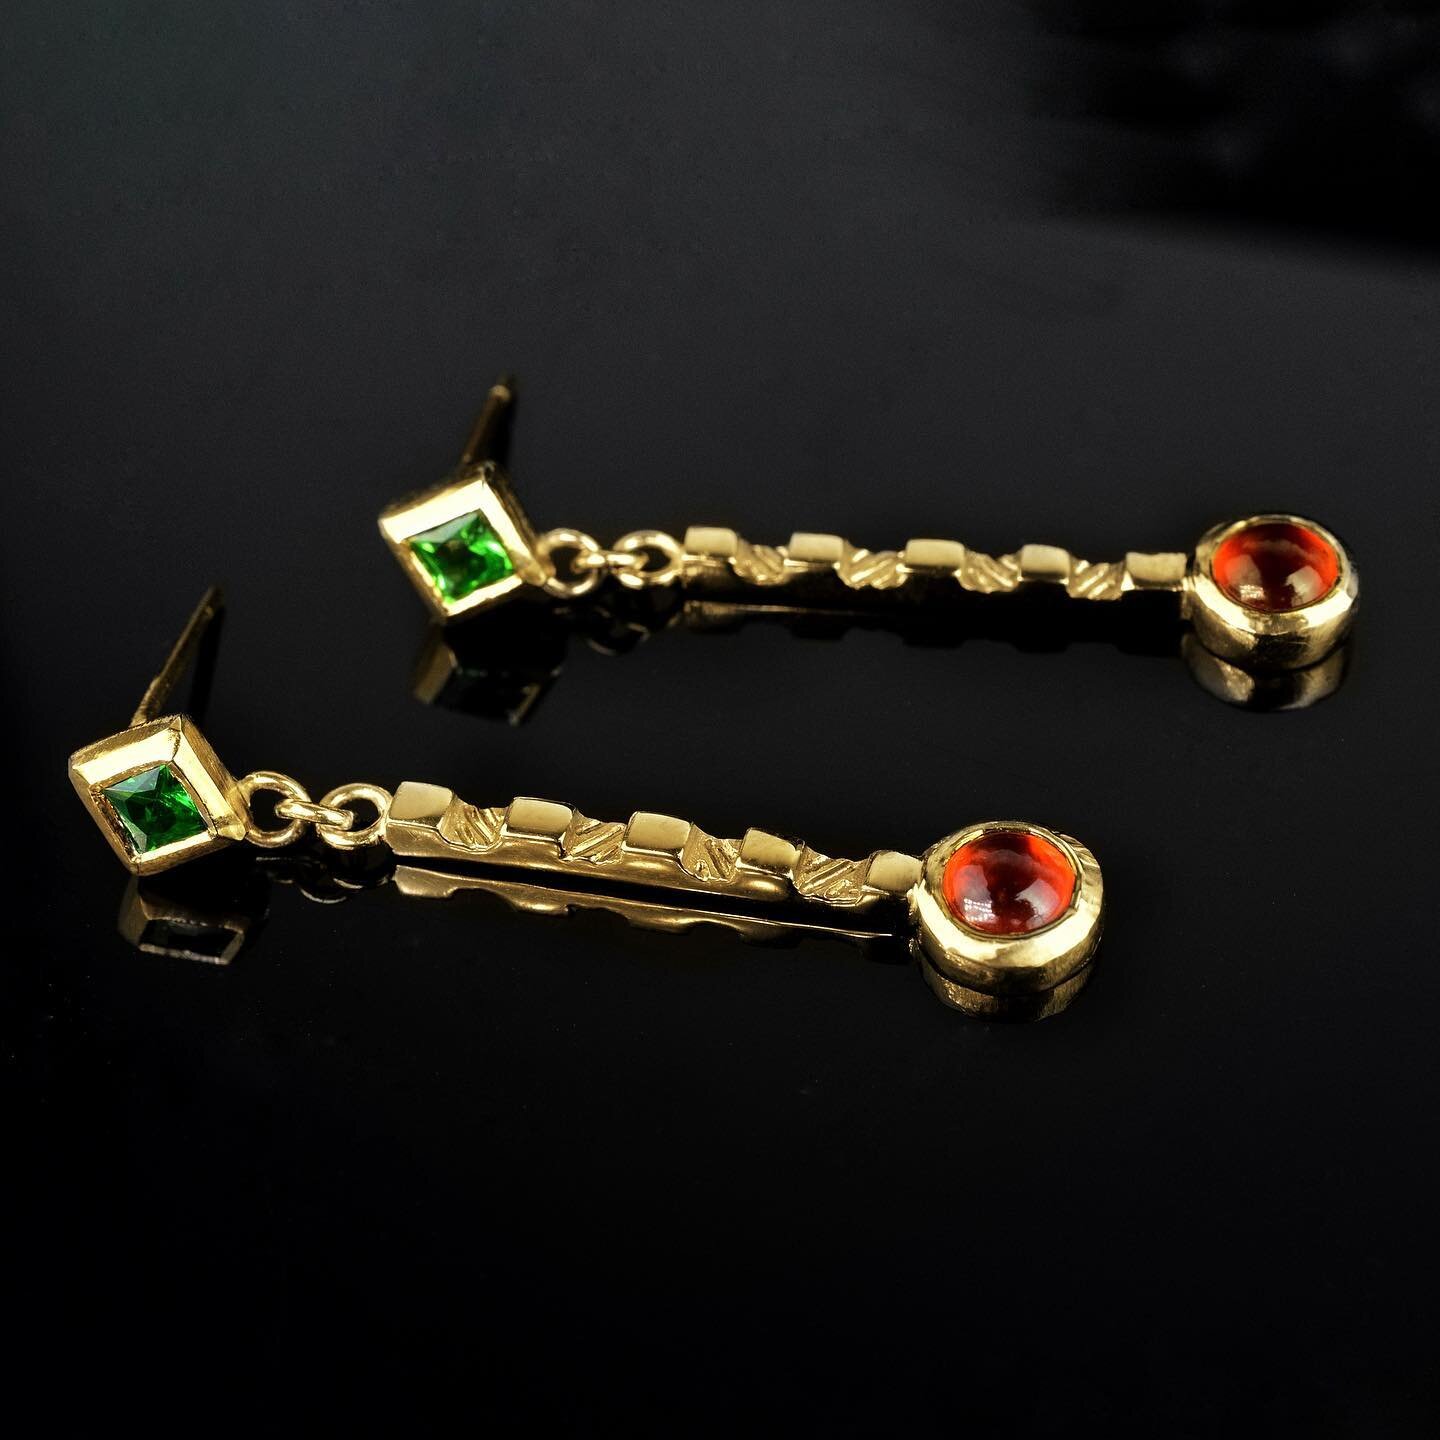 These Dynasty dangles are set with opulent green tsavorite garnets and rich fiery orange mandarin garnets In beaten gold. 

They feature hand Carved stepped pillars with contrasts of polished and engraved finishes. 

#handmade #garnetjewelry #handeng